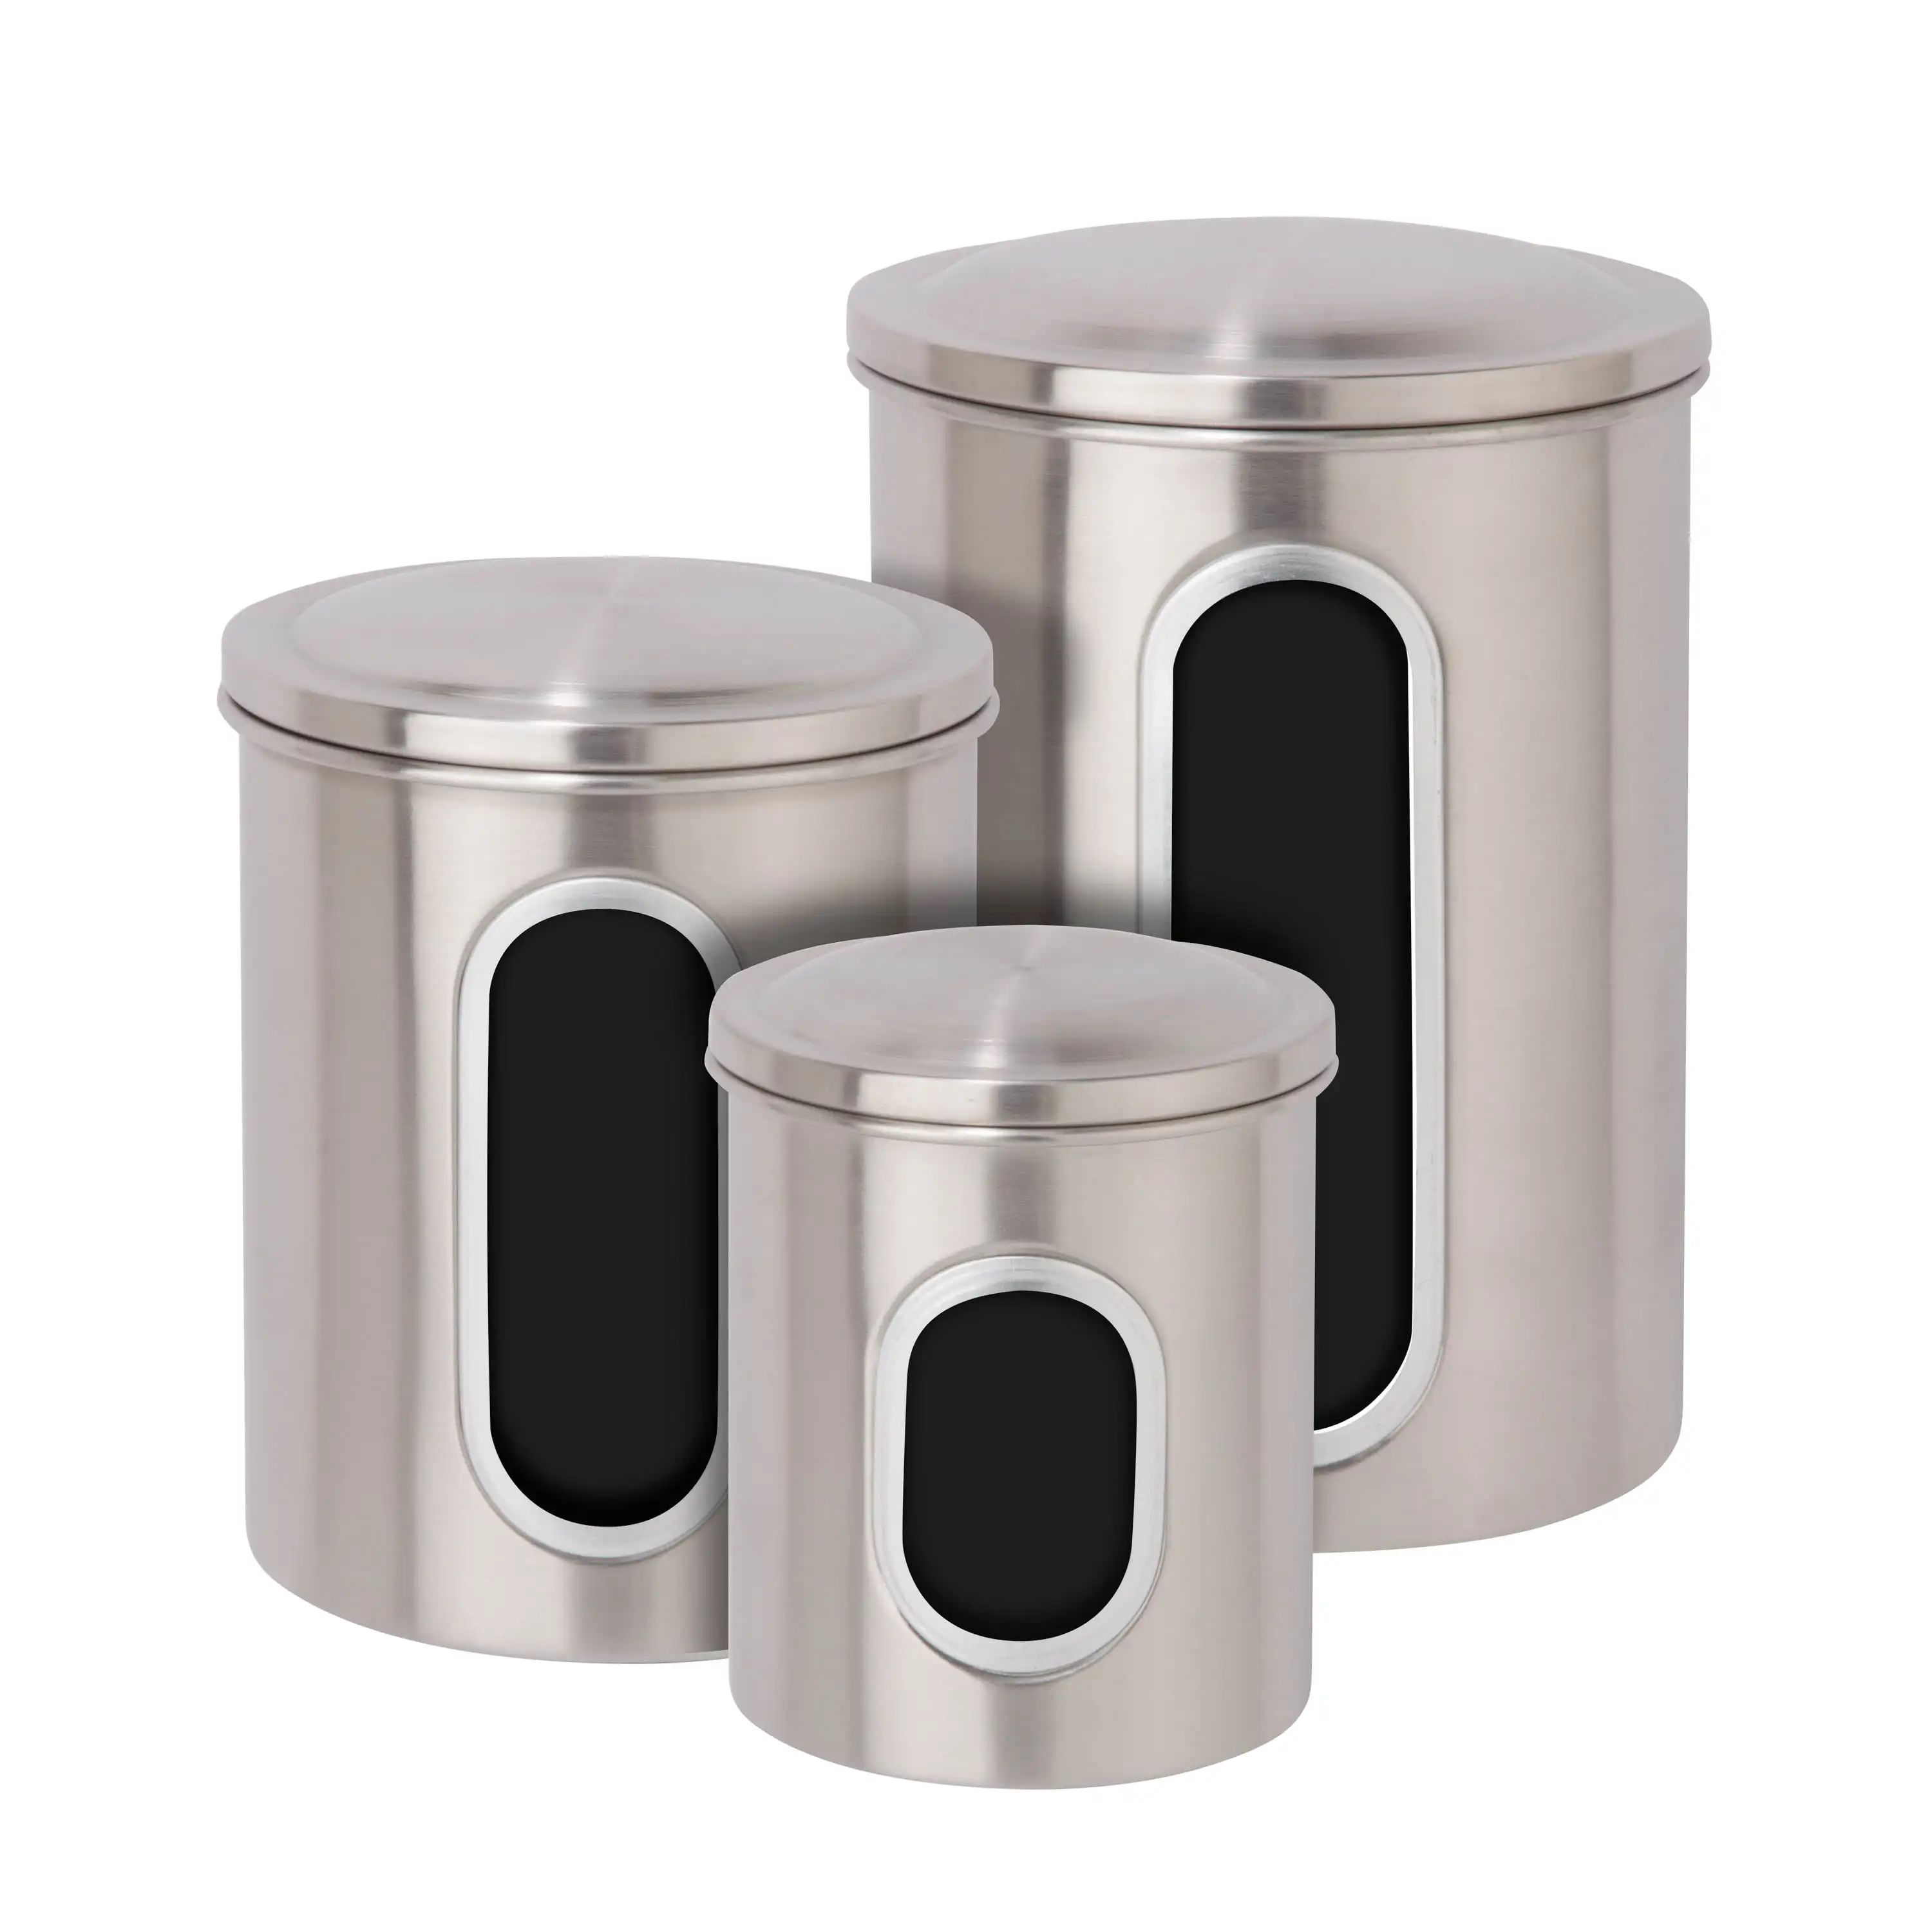 

Honey Can Do Three-Piece Set of Nesting Stainless Steel Kitchen Canisters